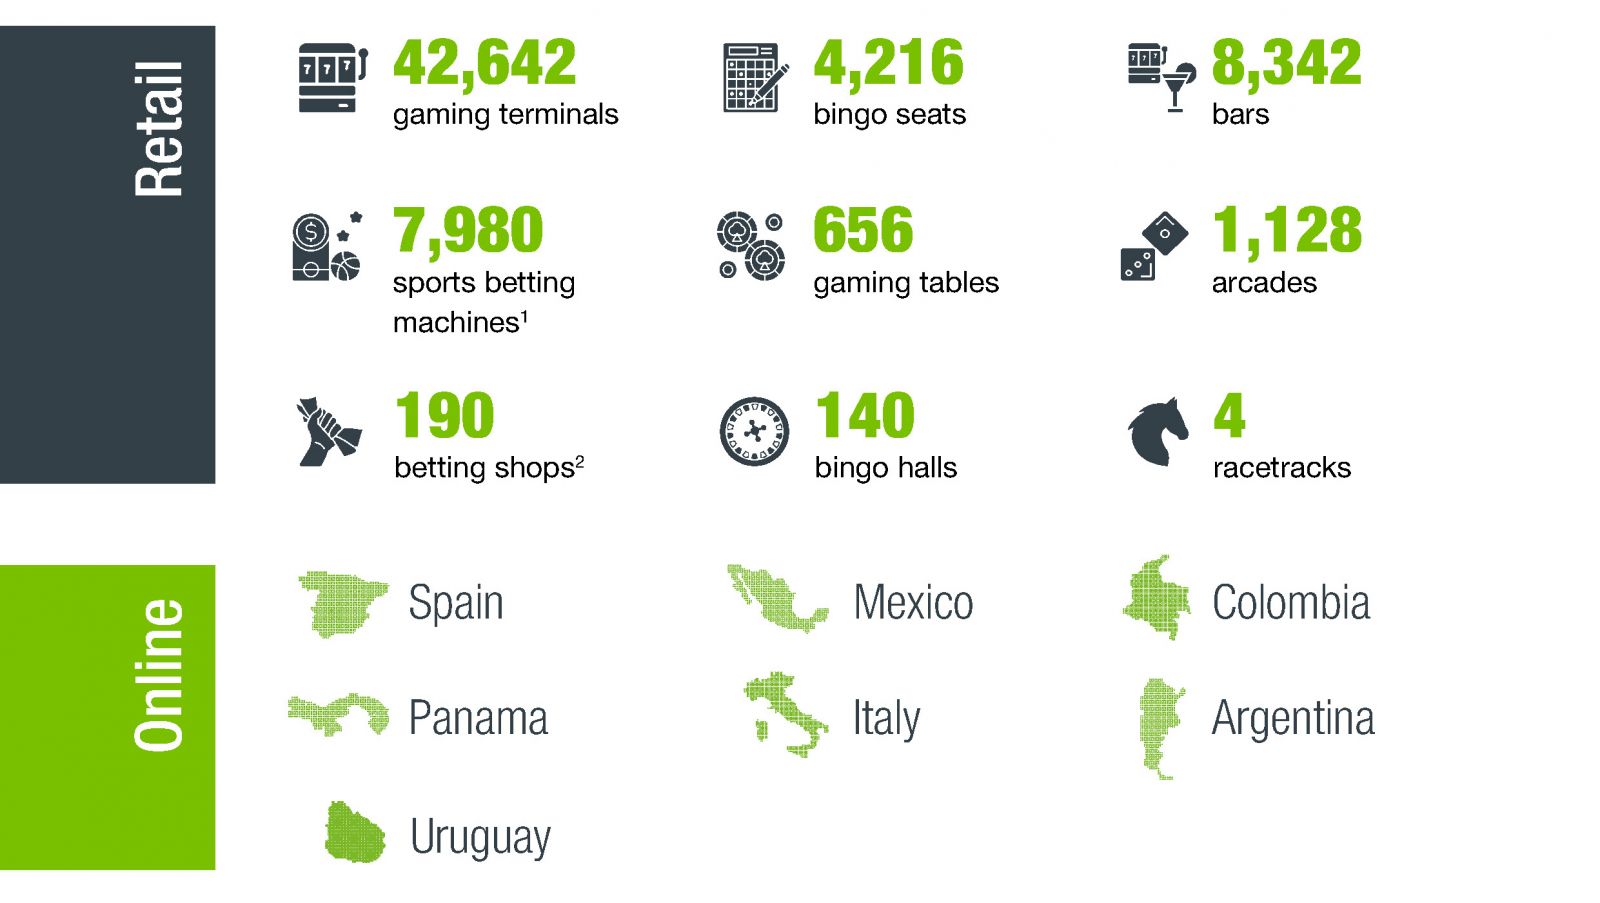 CODERE business areas, gambling, betting, casinos and racetracks | CODERE